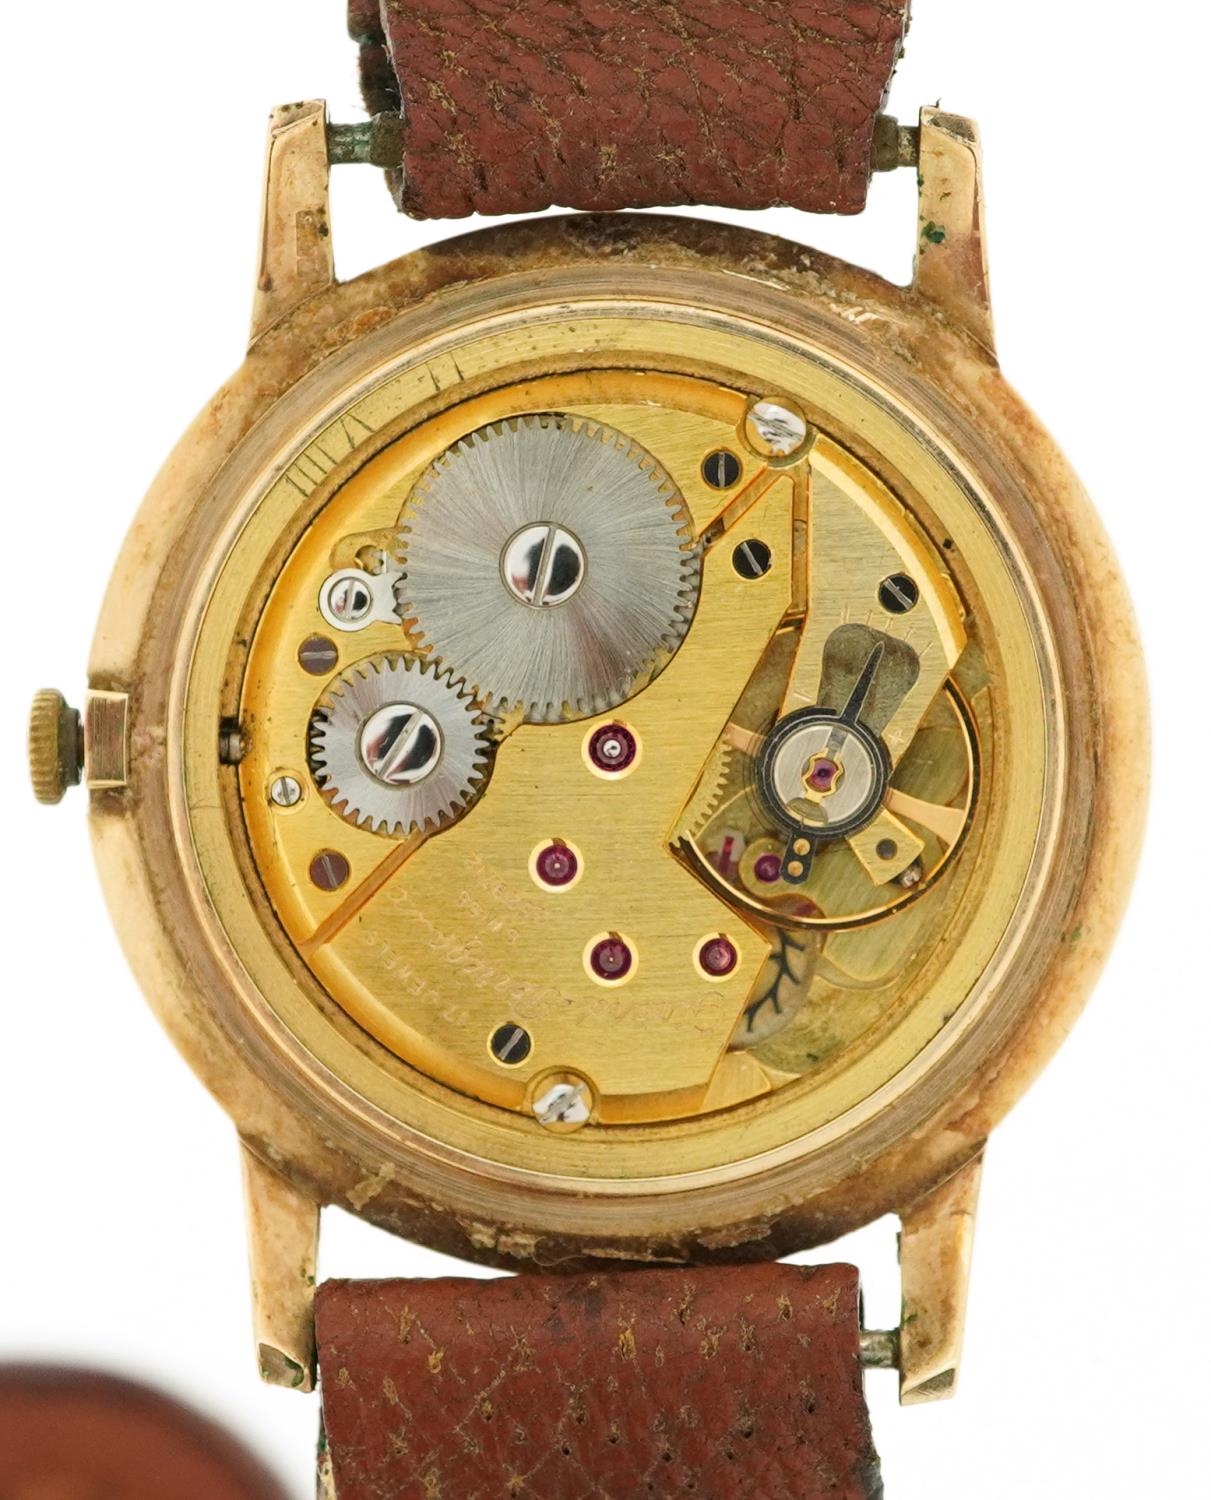 Girard Perregaux, gentlemen's 9ct gold manual wind wristwatch, the movement numbered 2529712, 32mm - Image 4 of 6